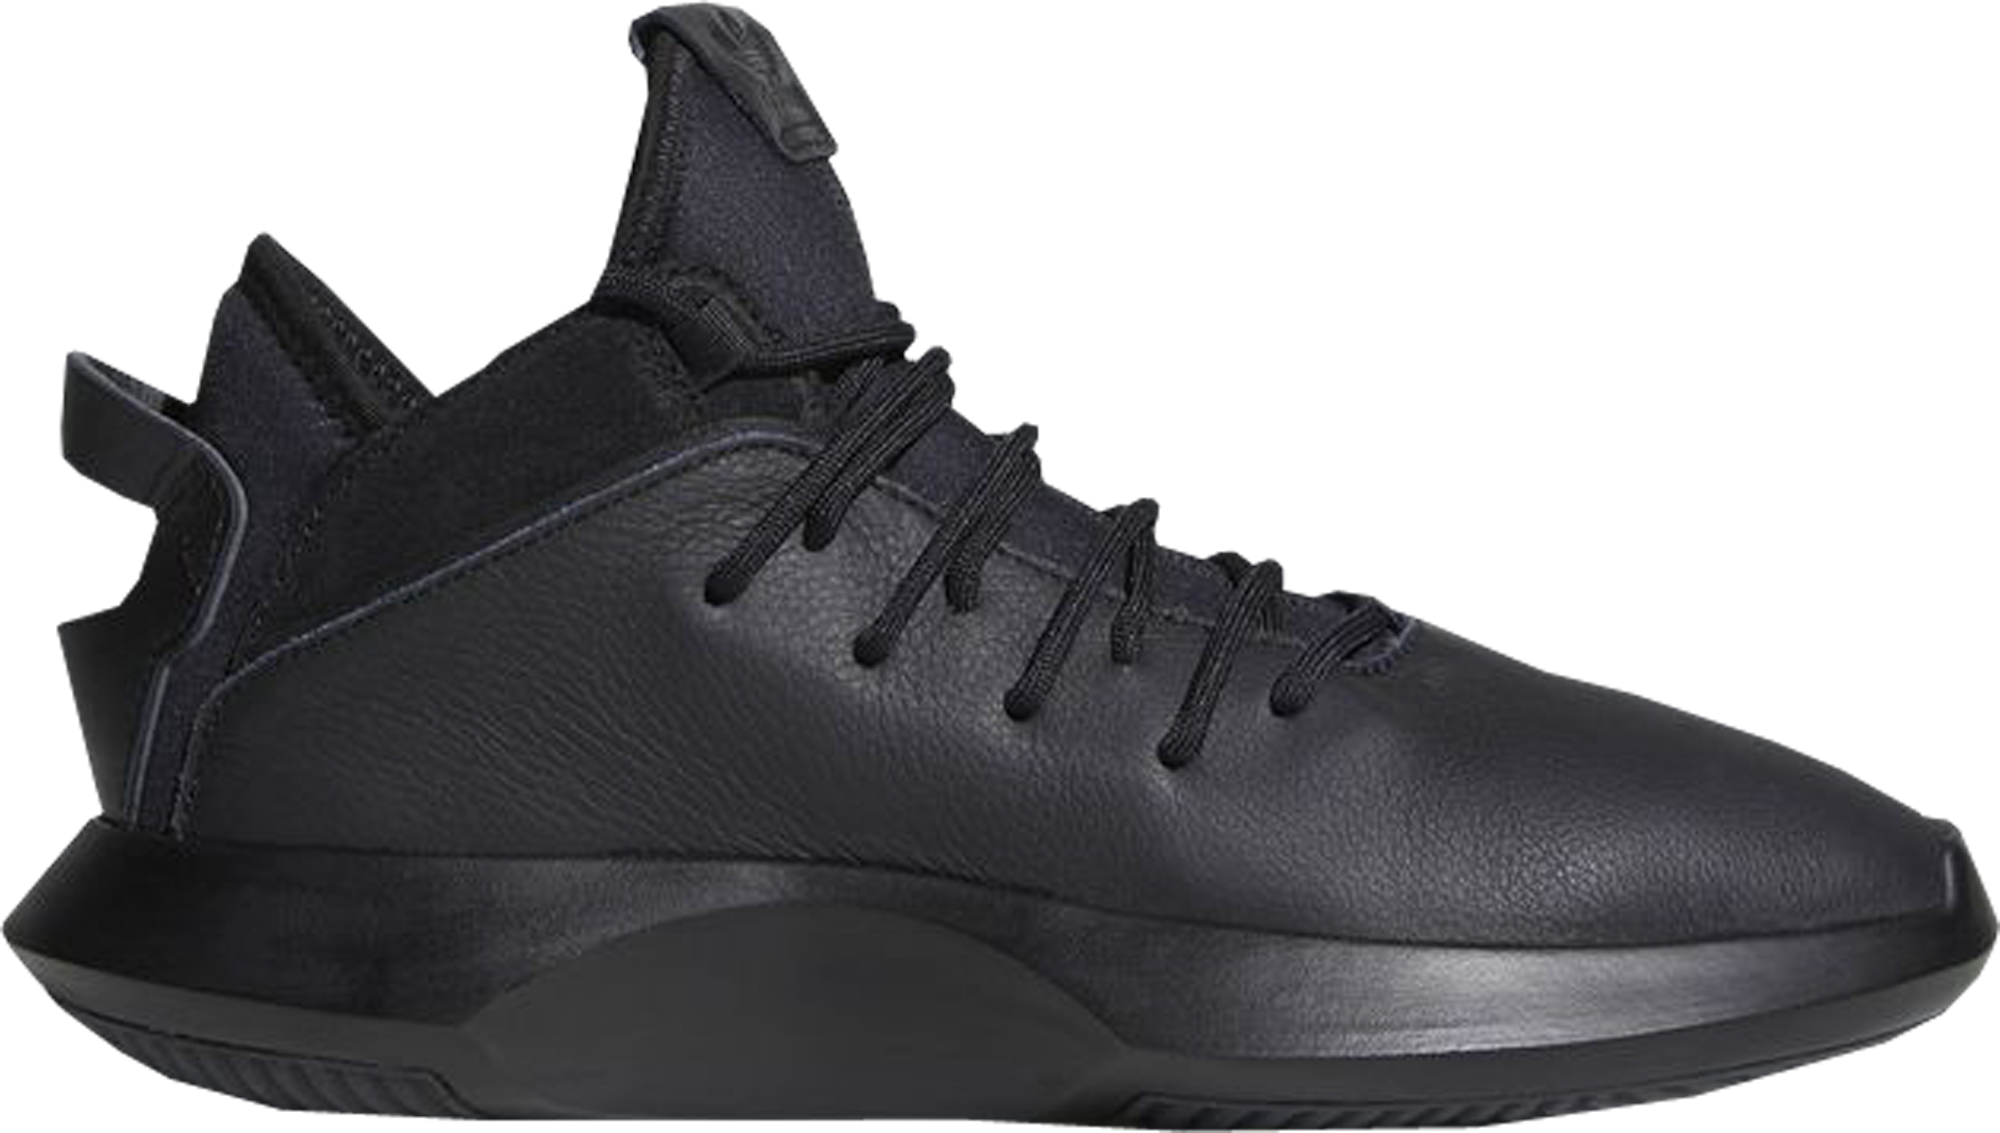 adidas crazy 1 adv leather shoes